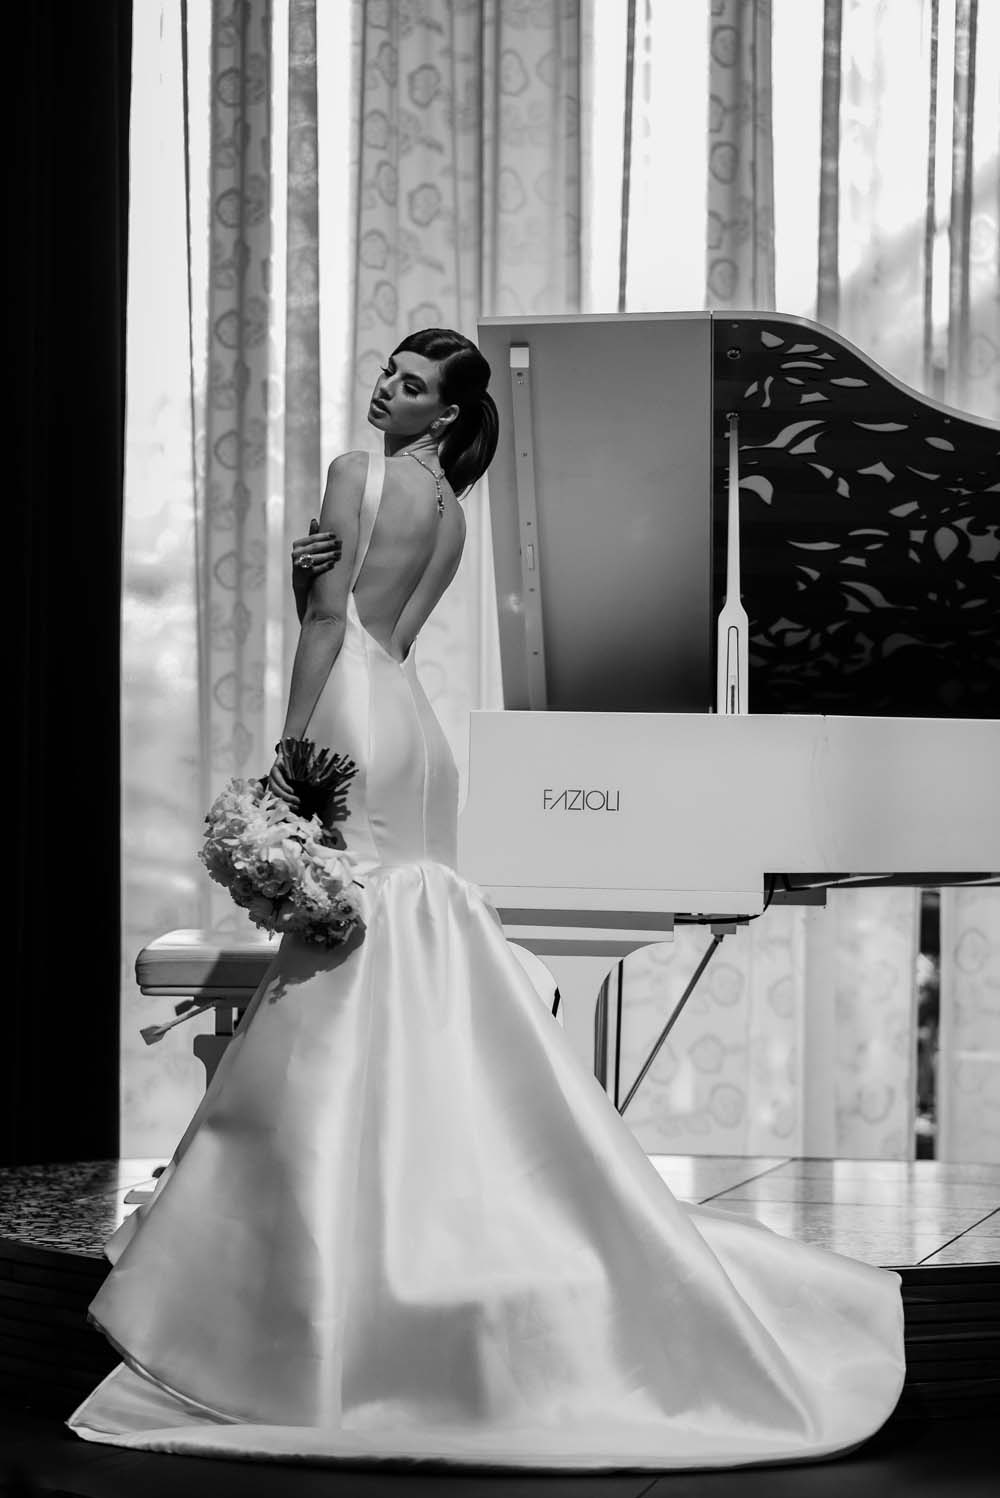 A Sophisticated Black and White Wedding Styled Shoot